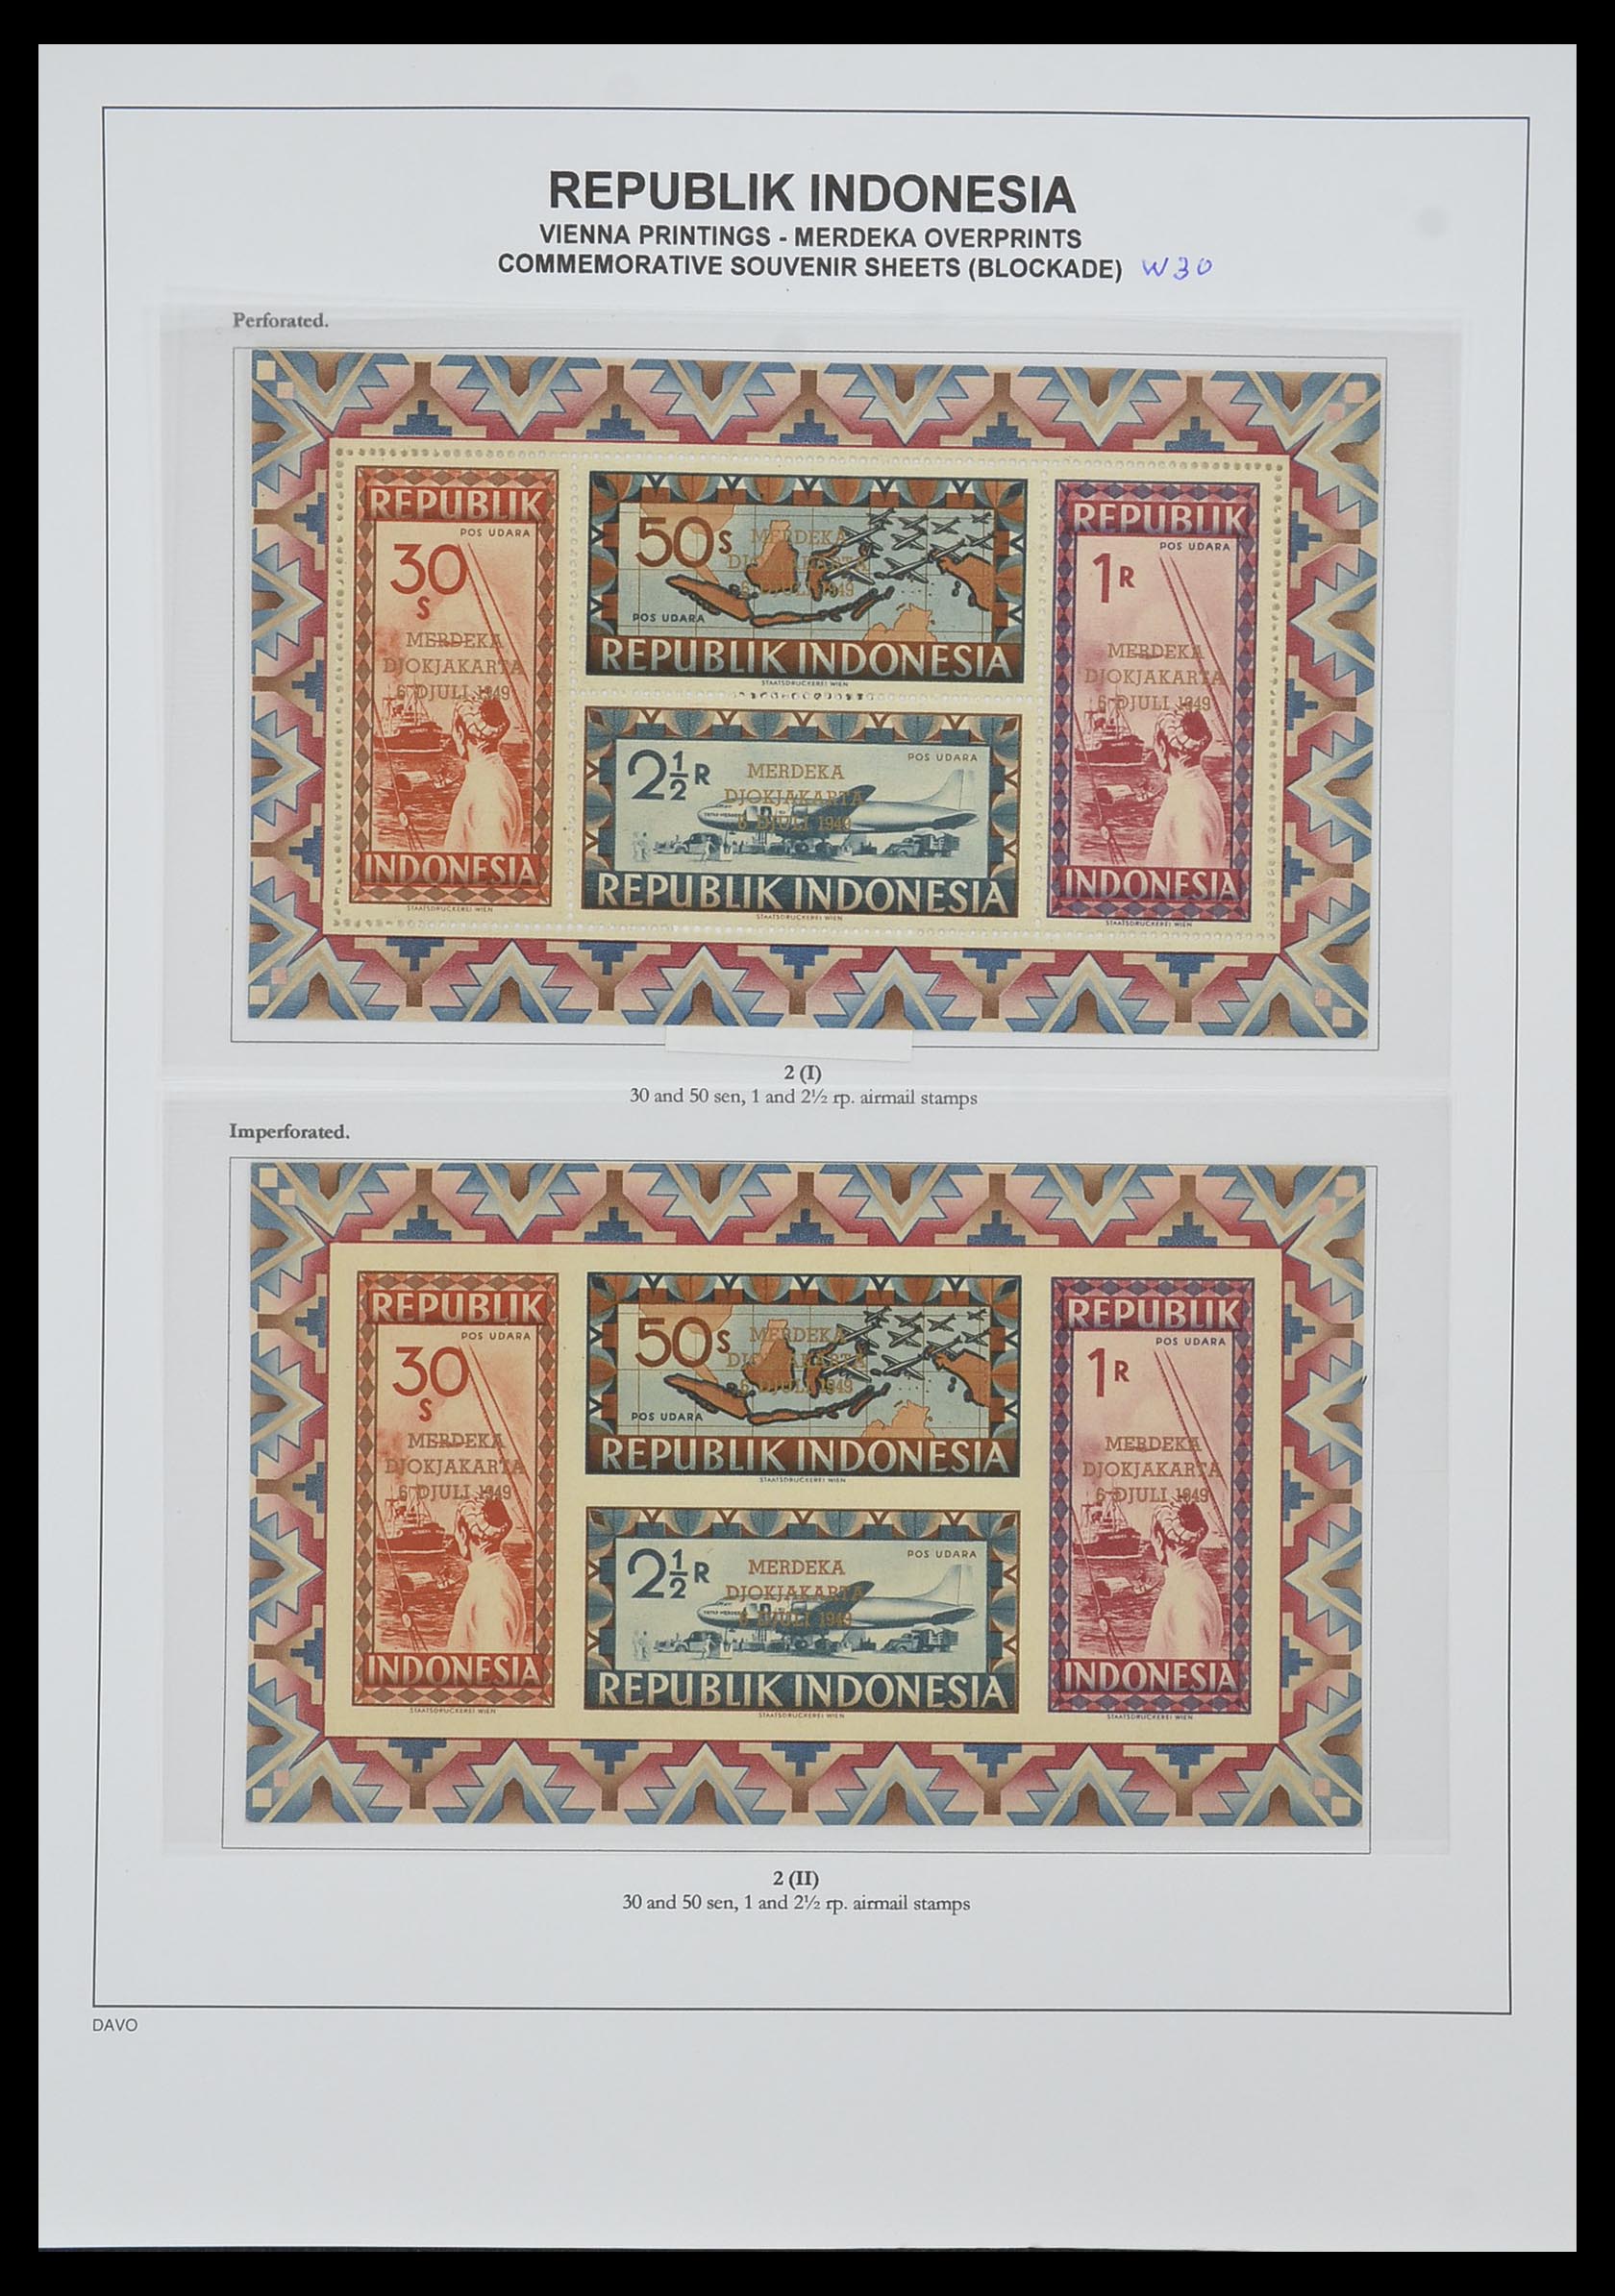 33988 043 - Stamp collection 33988 Vienna printings Indonesia.